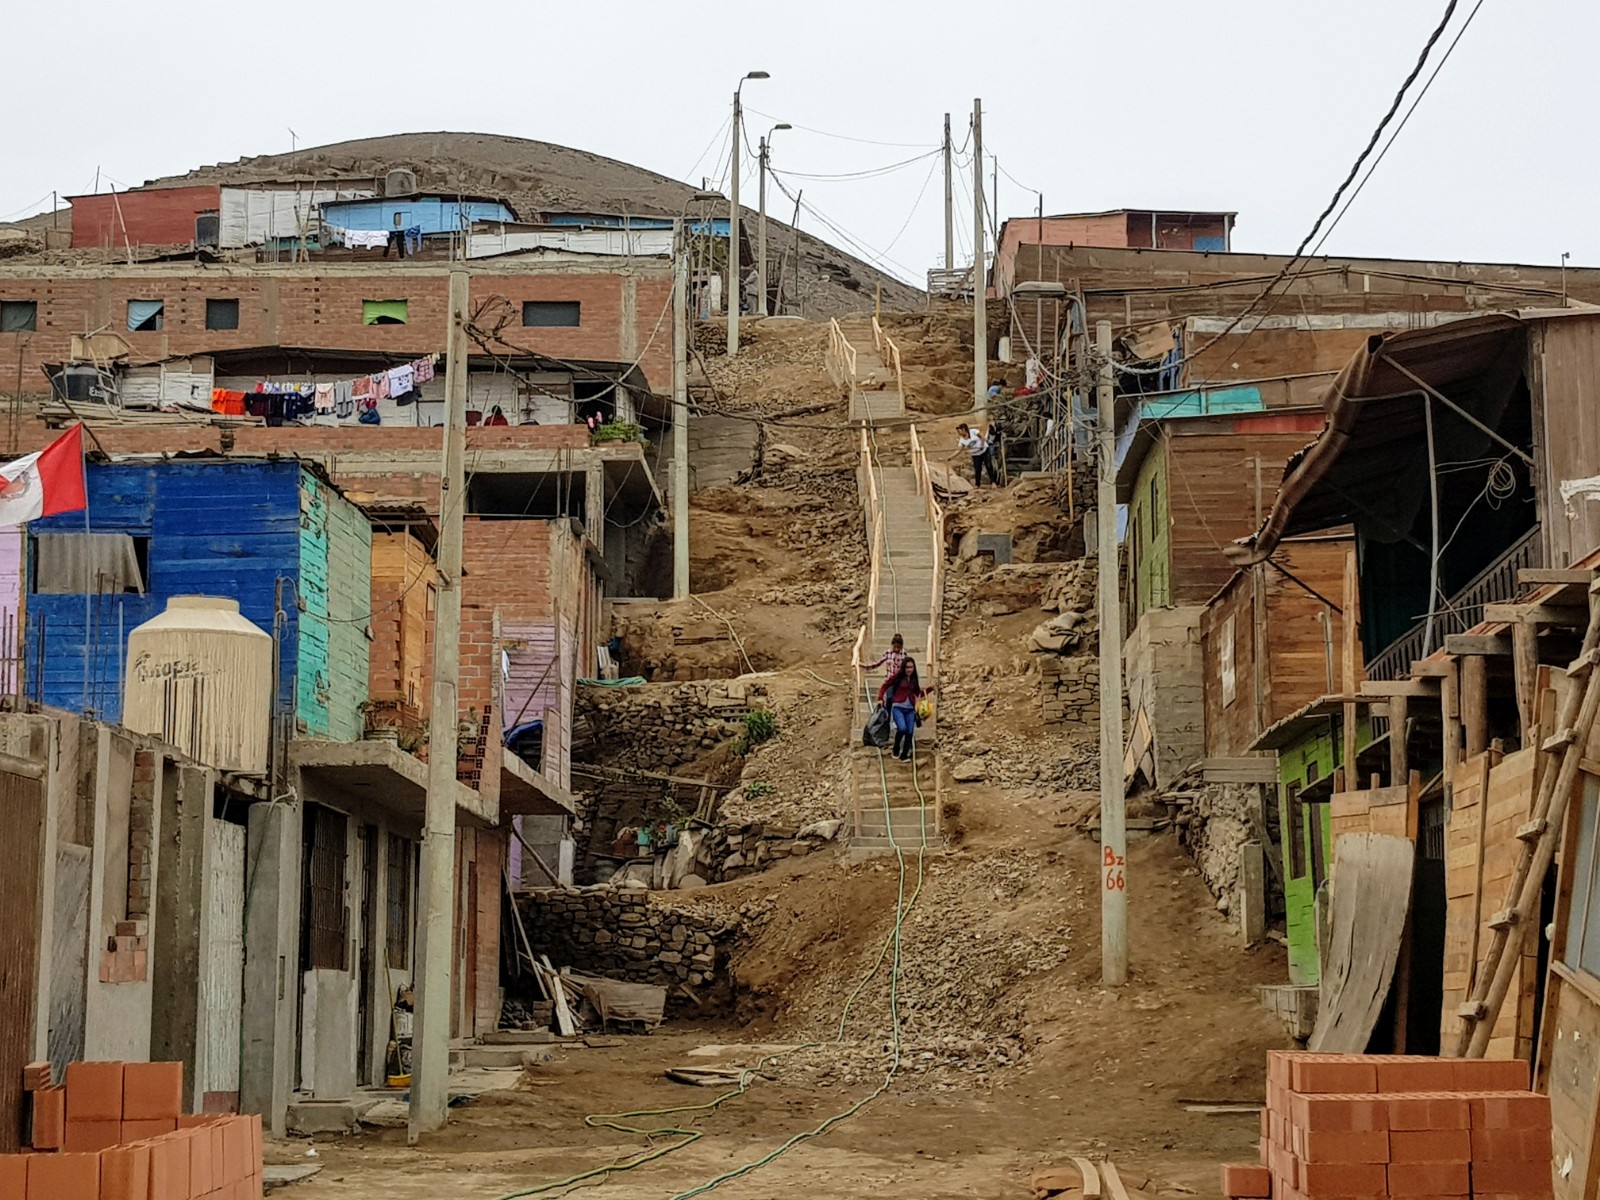 Covid-19 is adding to Peru’s many problems warns Fr Peter Hughes